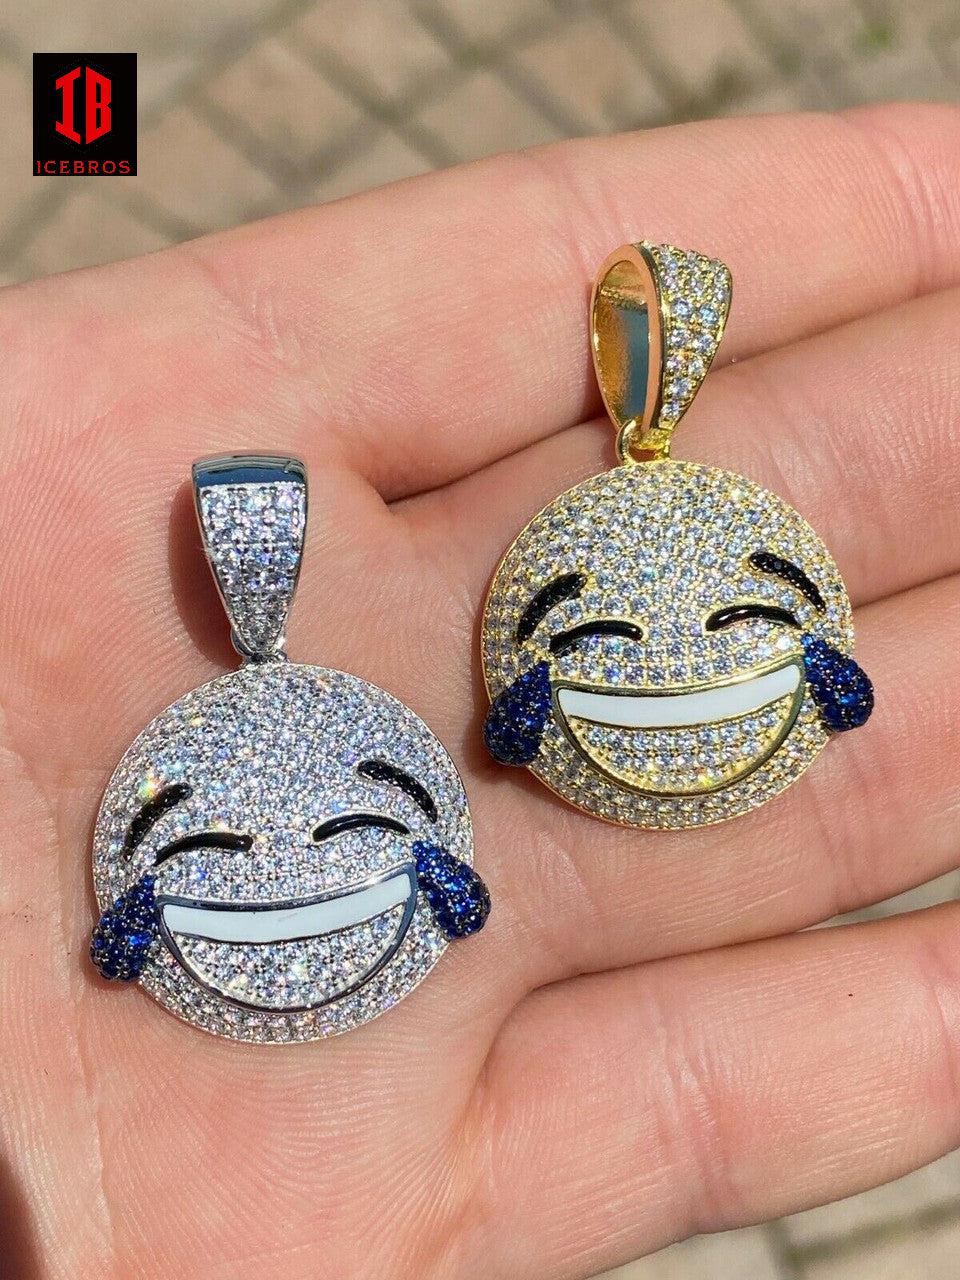 925 Sterling Silver Hip Hop LOL Emoji Charm Icebros Iced Smiley Laughing